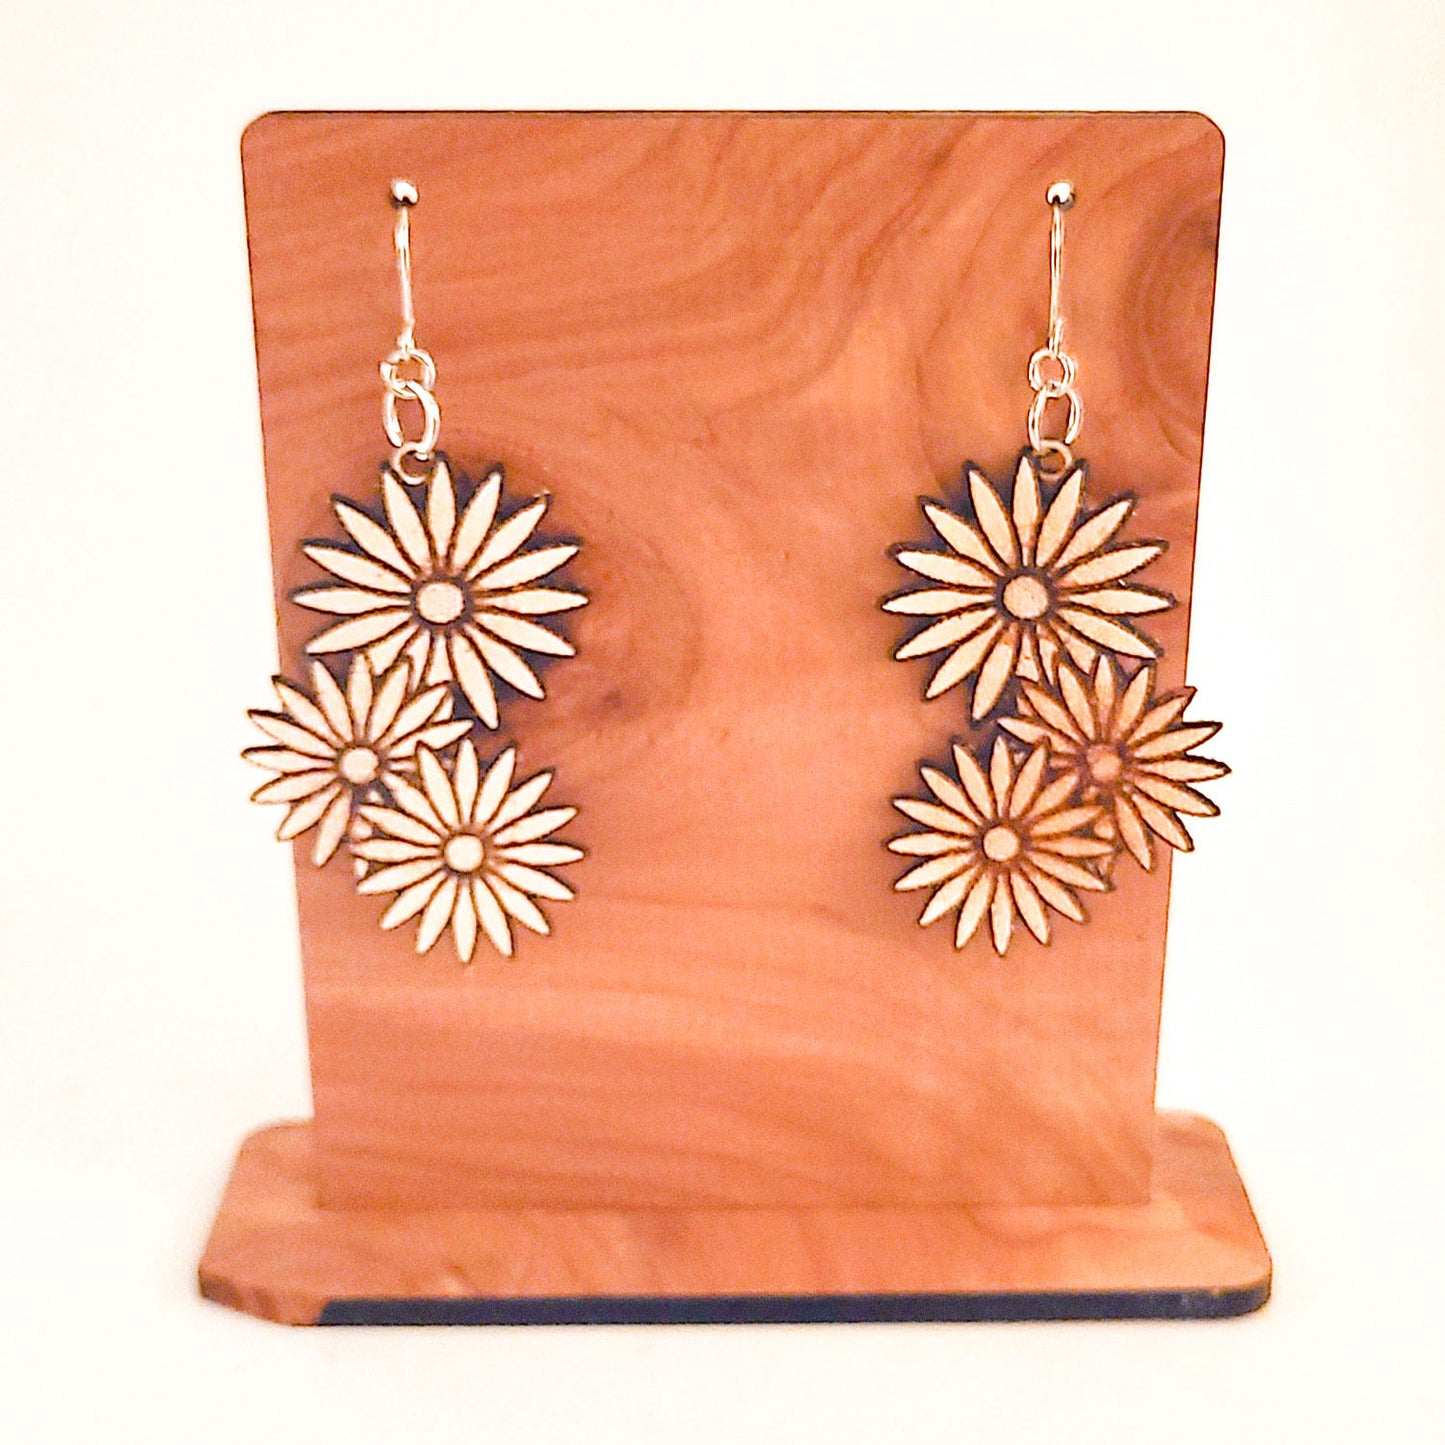 Leather Daisy Dangles